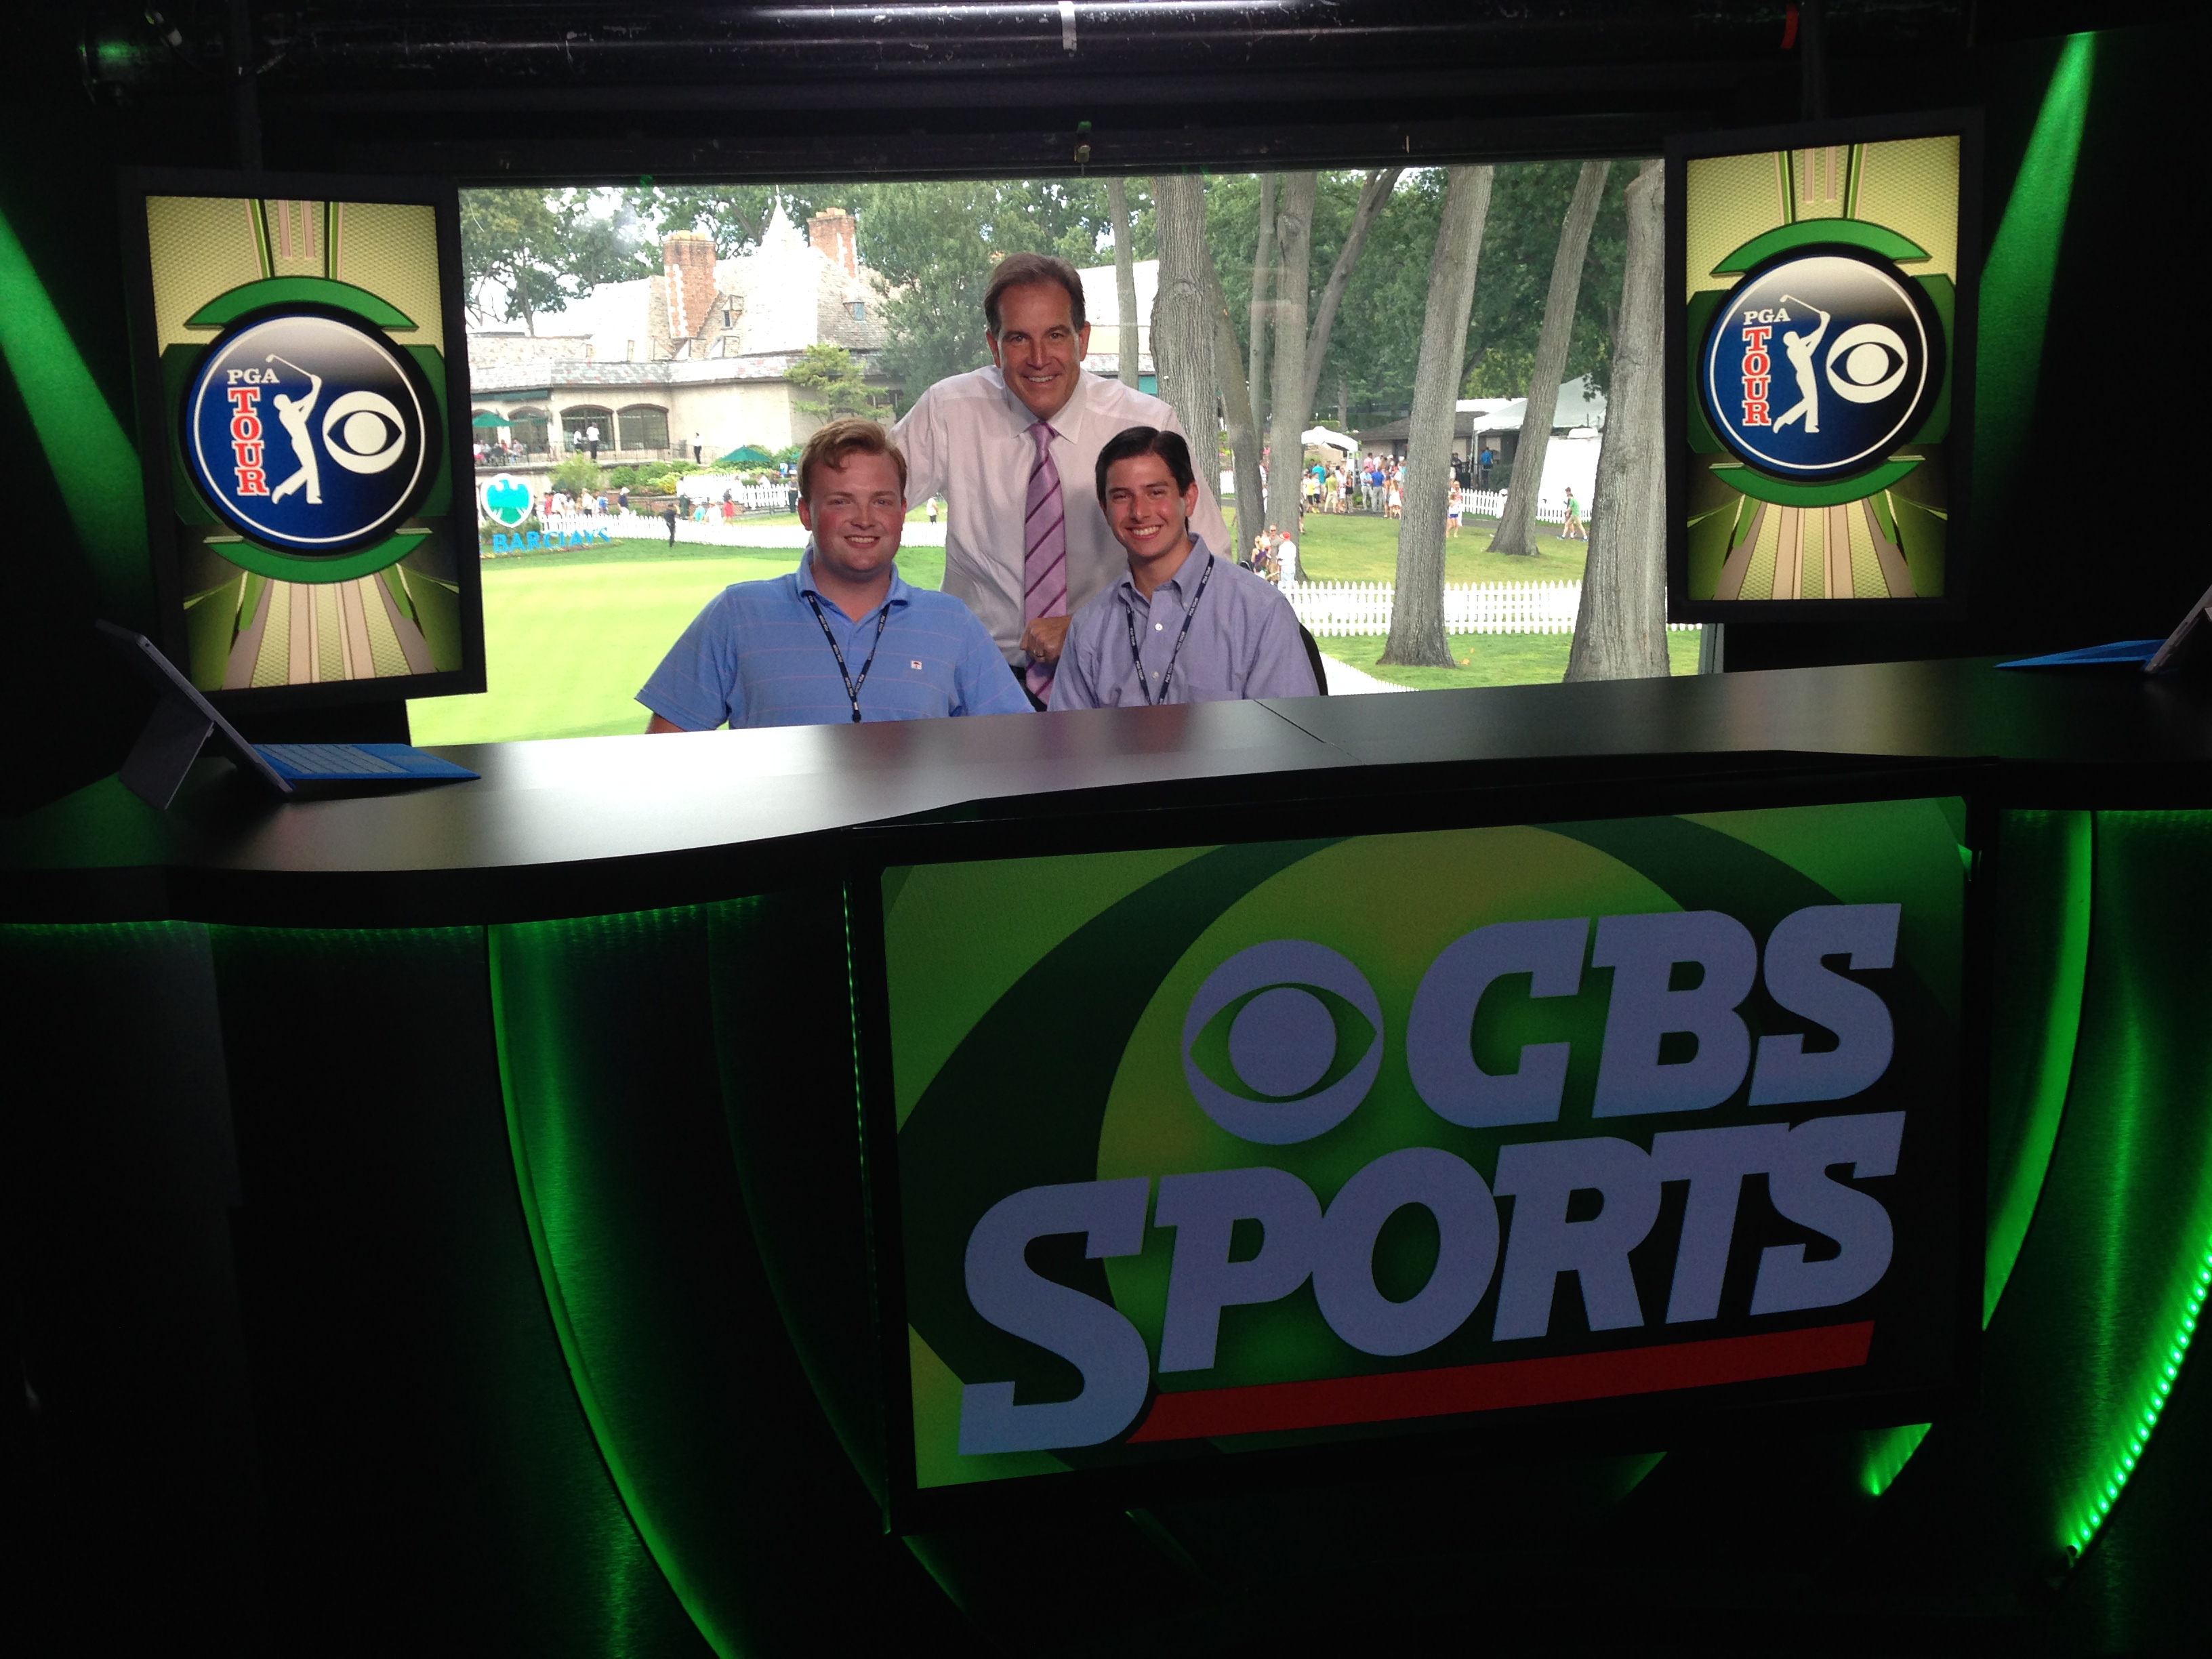 Neil A. Carousso (right) and colleague Rich DeKorte (left) pose for a picture with Jim Nantz (middle) in the CBS Sports studio at the 18th hole at The Barclays 2014 PGA Tour event in Paramus, NJ